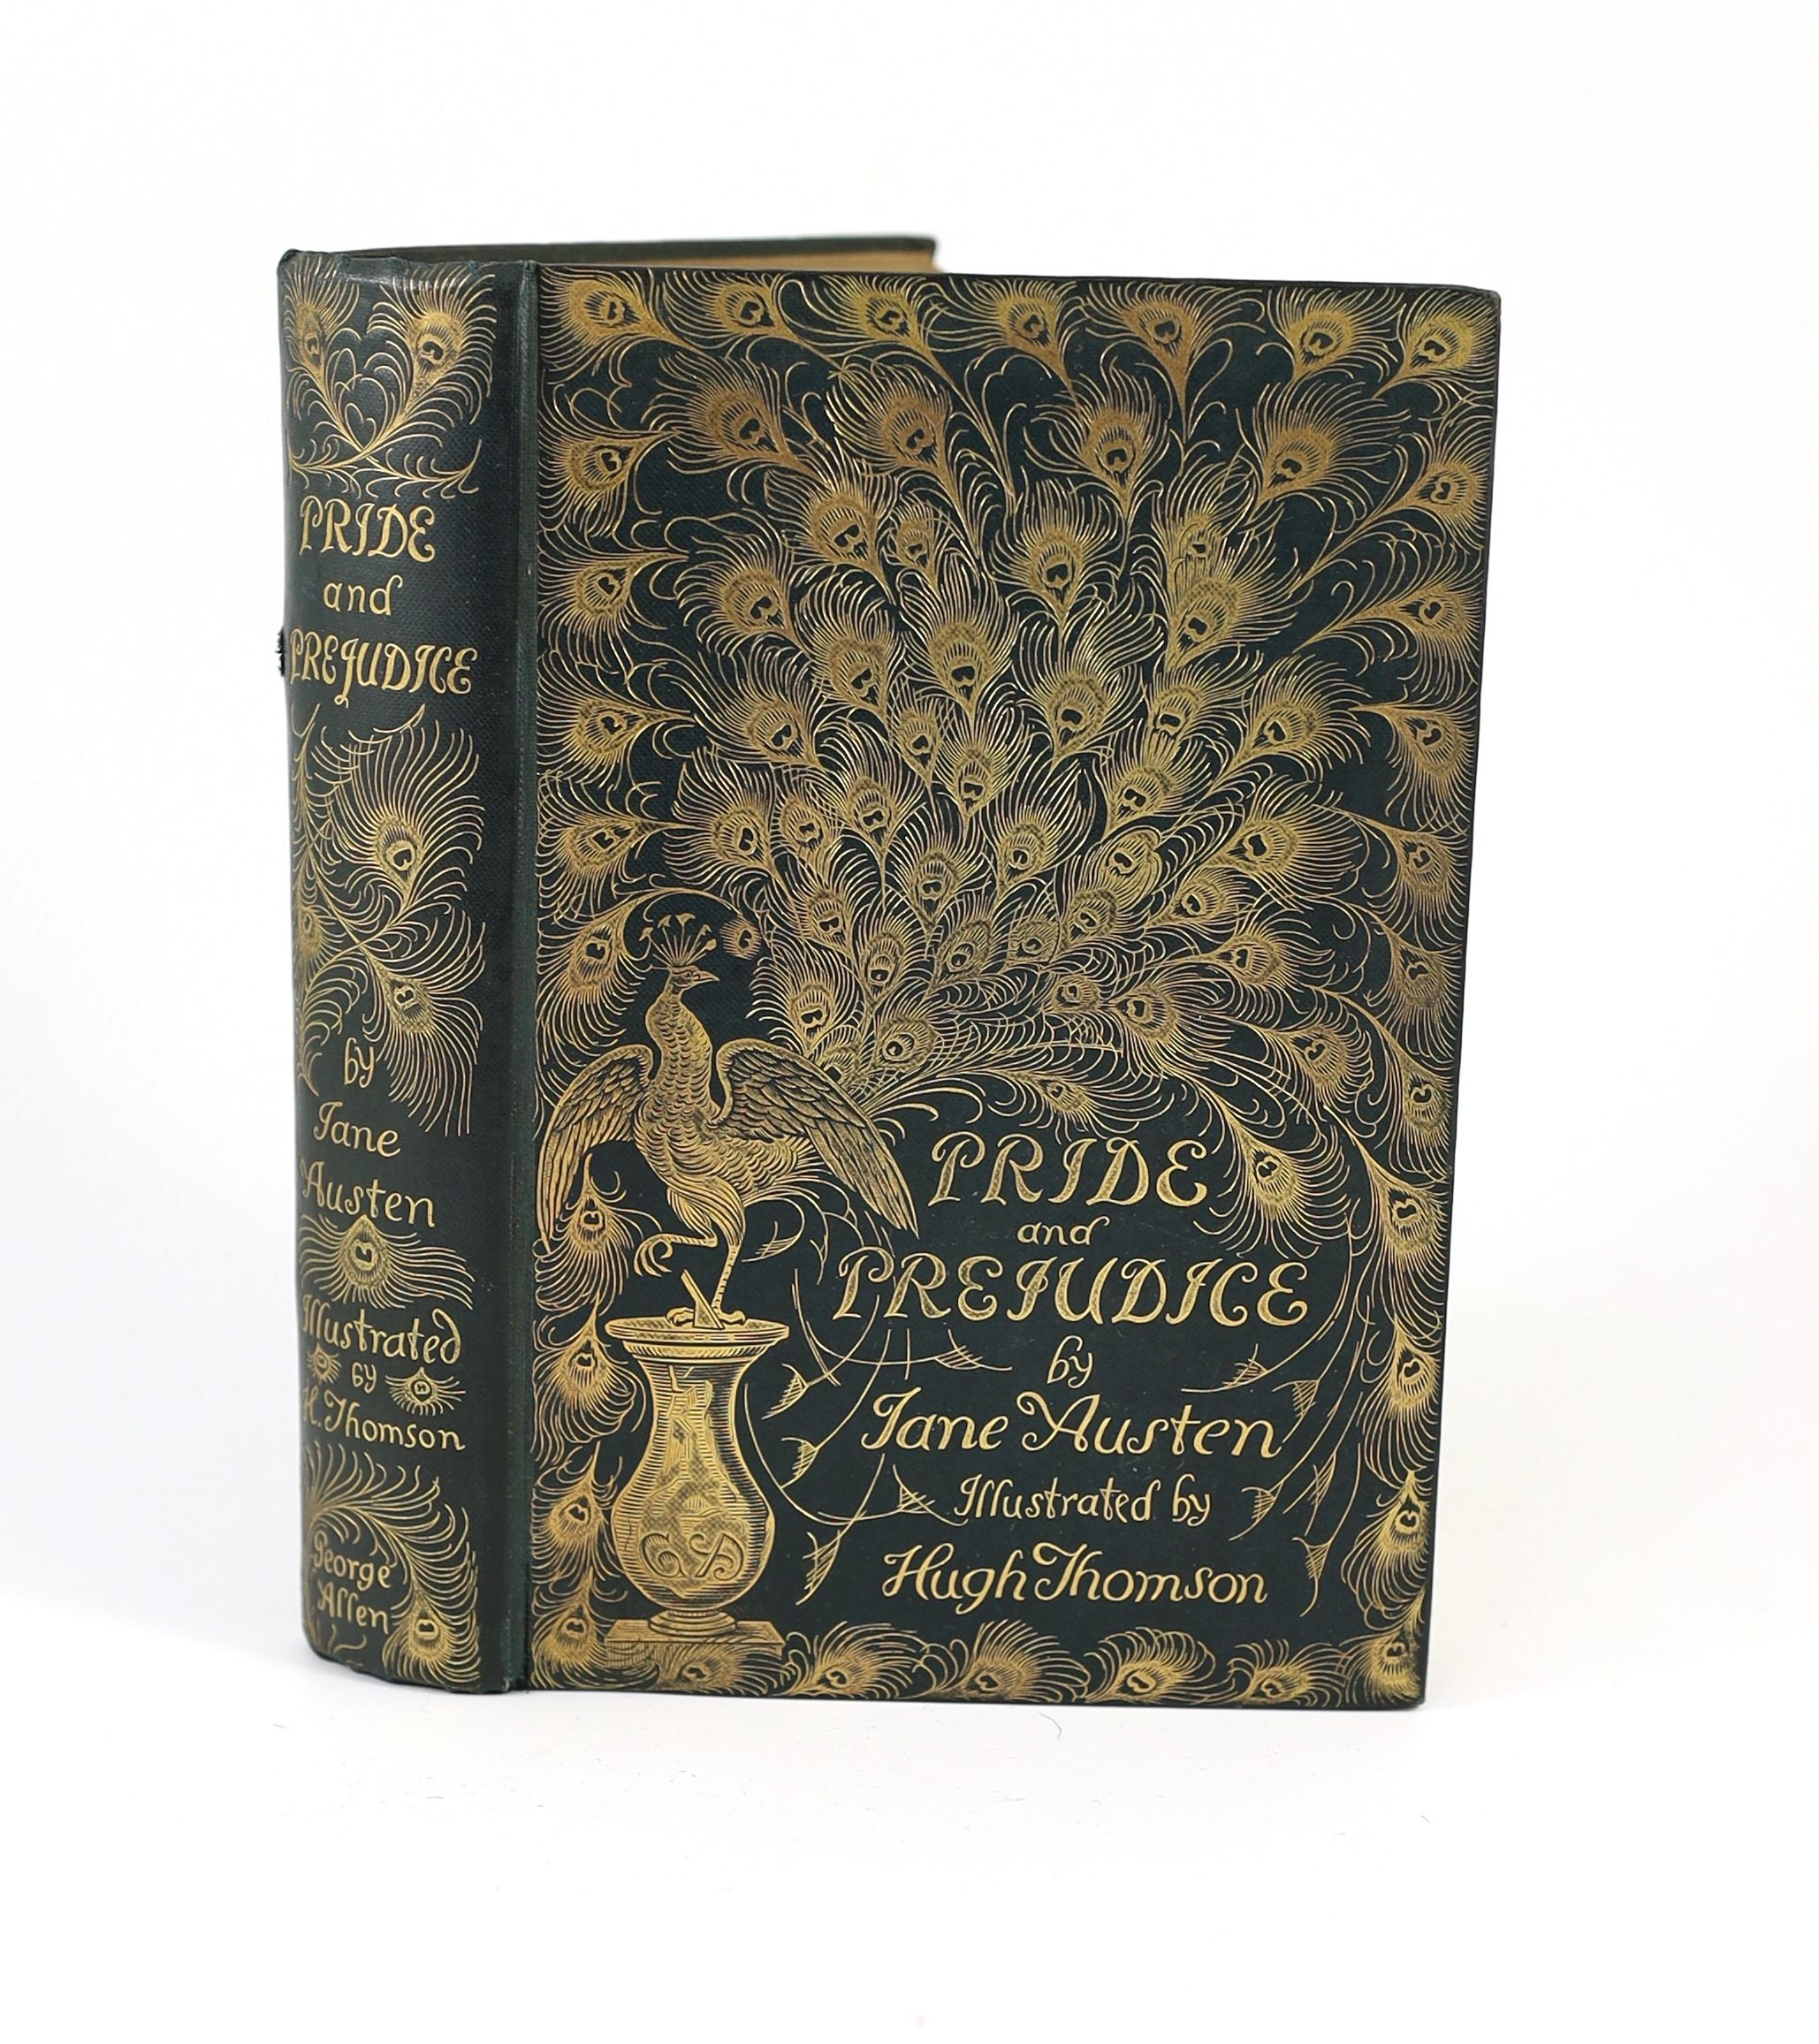 Austen, Jane - Pride and Prejudice... with a preface by George Sainsbury and illustrations by Hugh Thomson; dark blue / green publisher's cloth, upper cover and spine gilt overall in the 'Peacock' design, ge. and dark bl